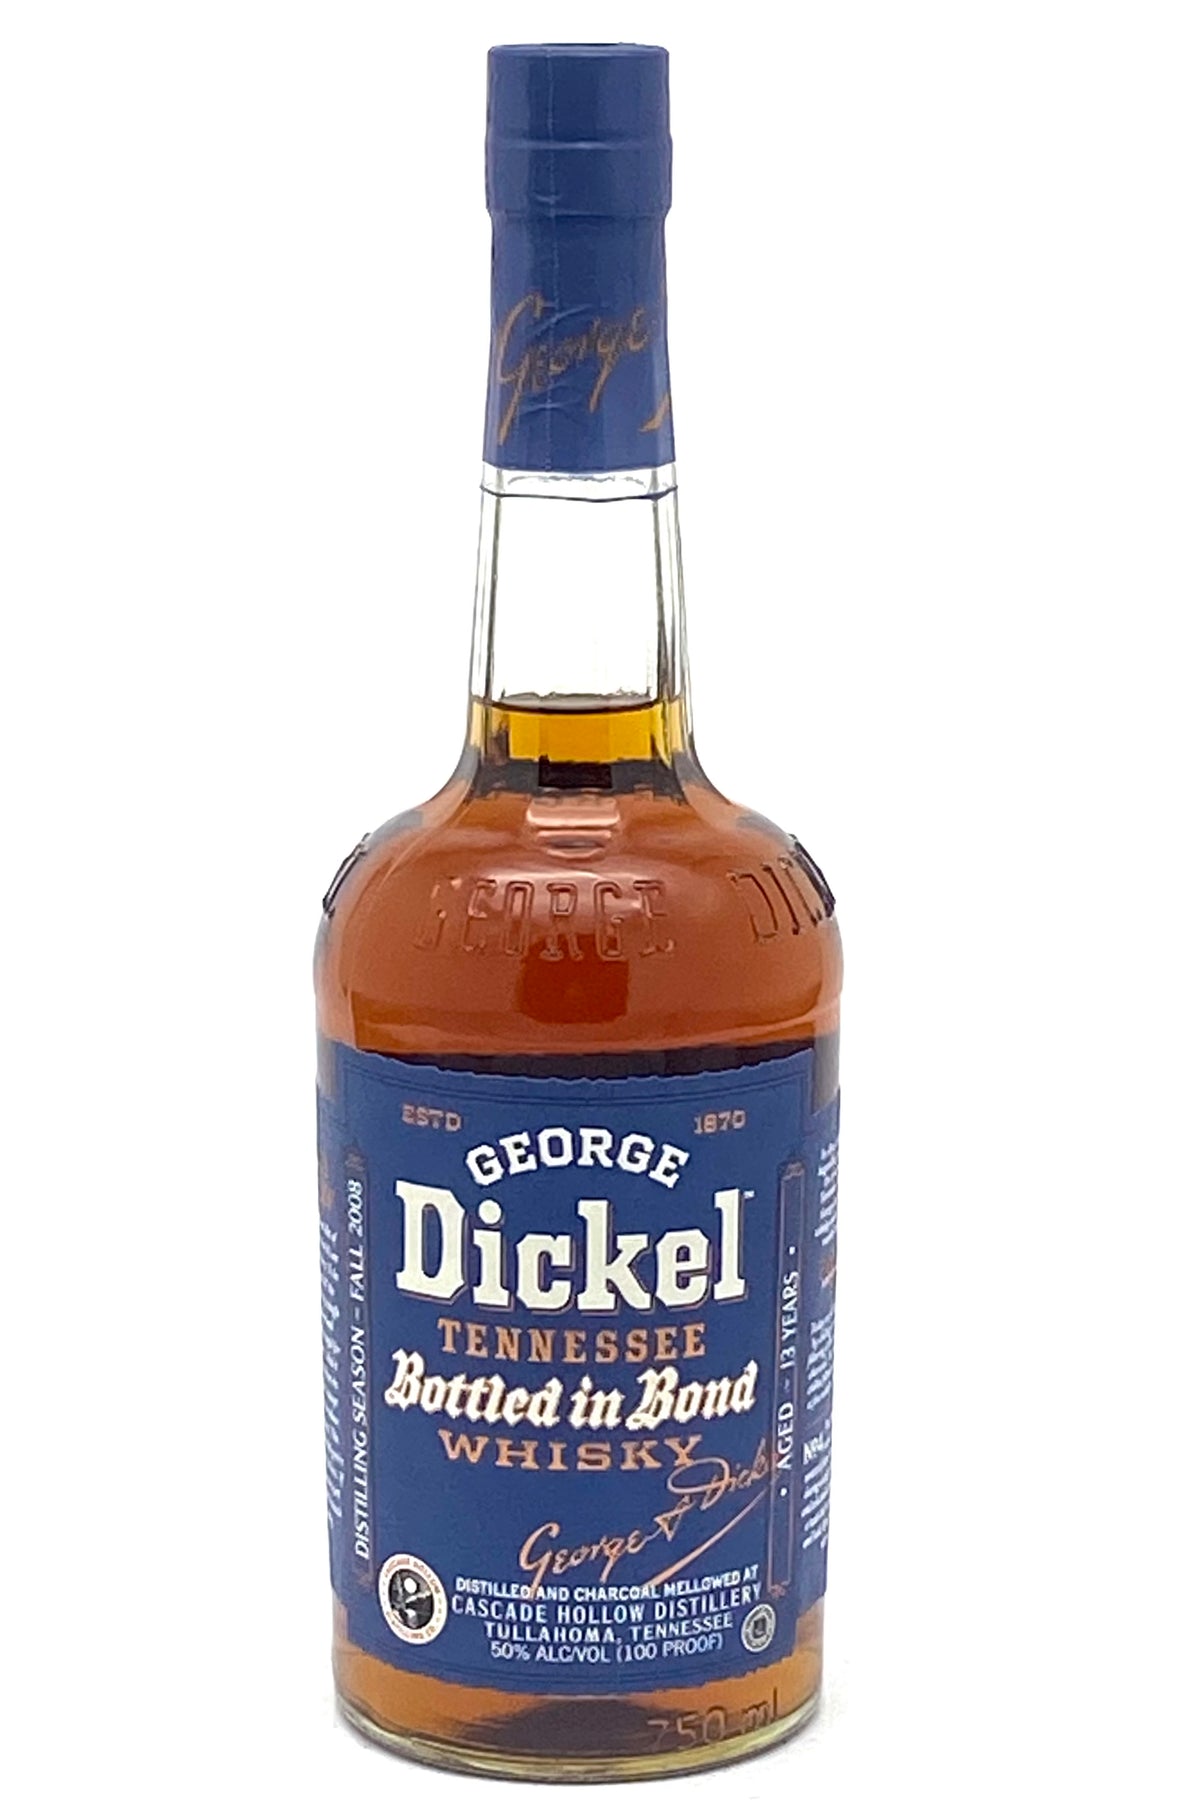 George Dickel 13 Year Old Bottled-in-Bond Tennessee Whisky